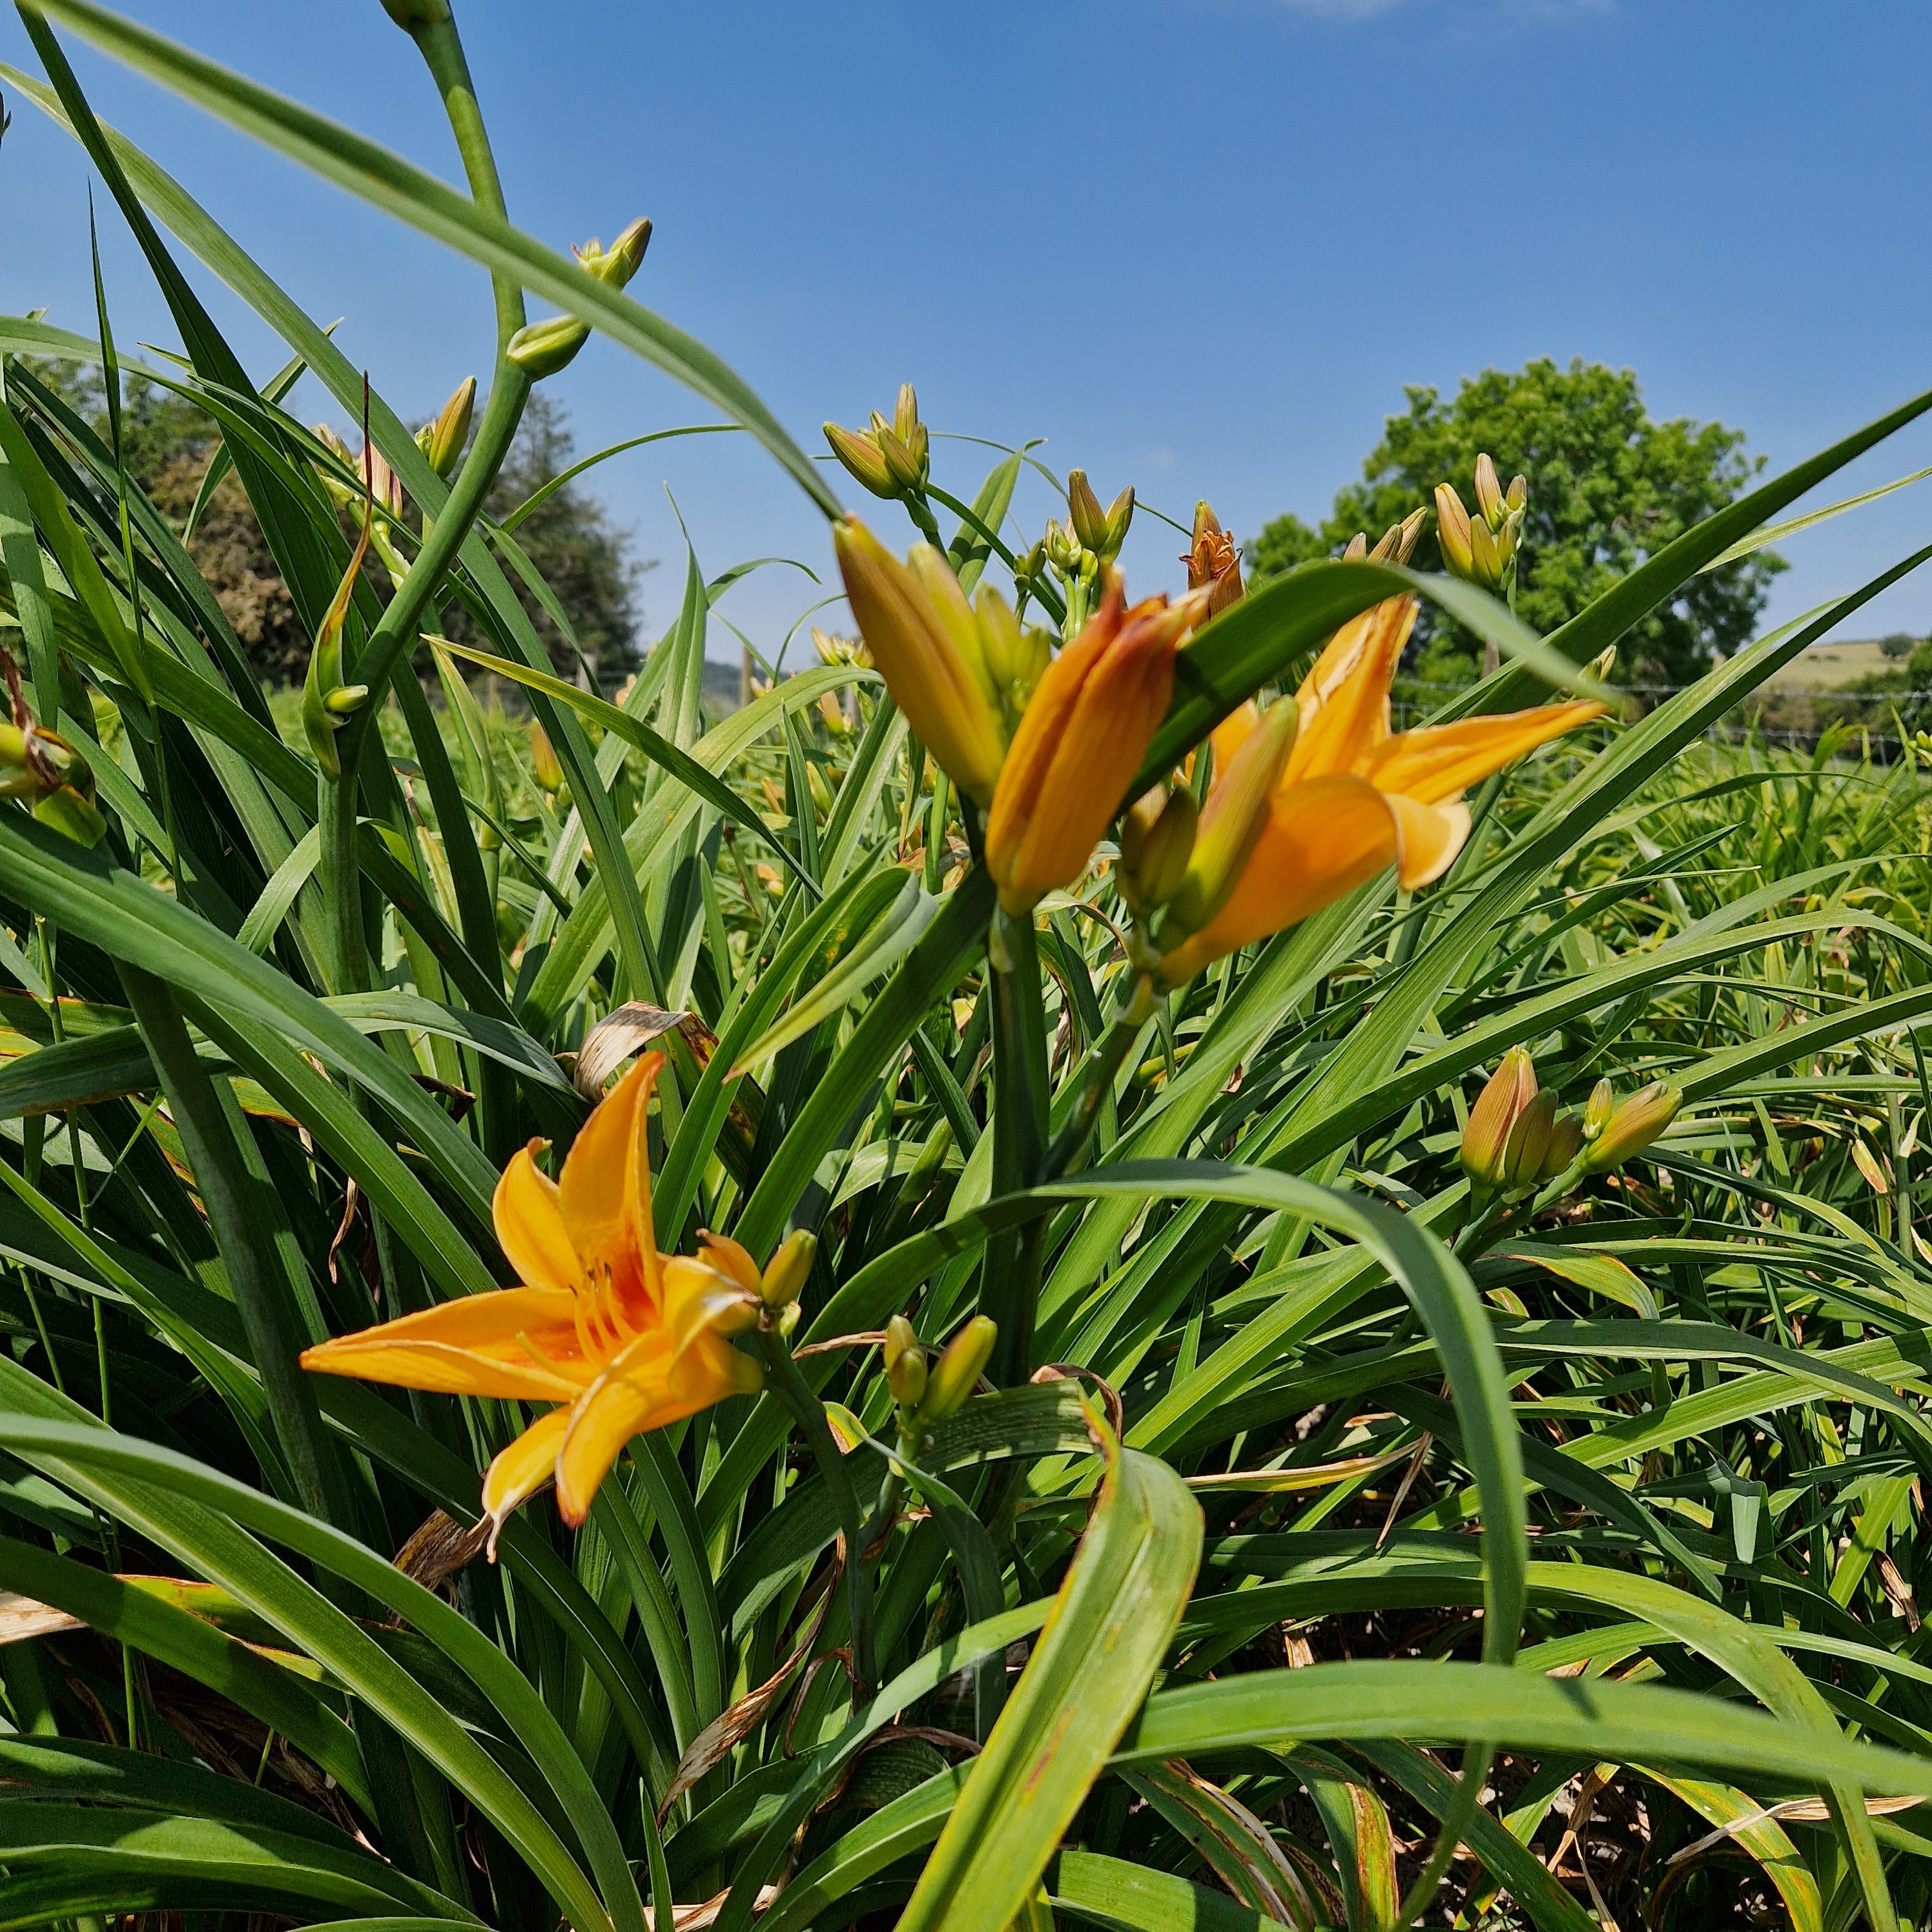 Introducing; New Hope Daylilies